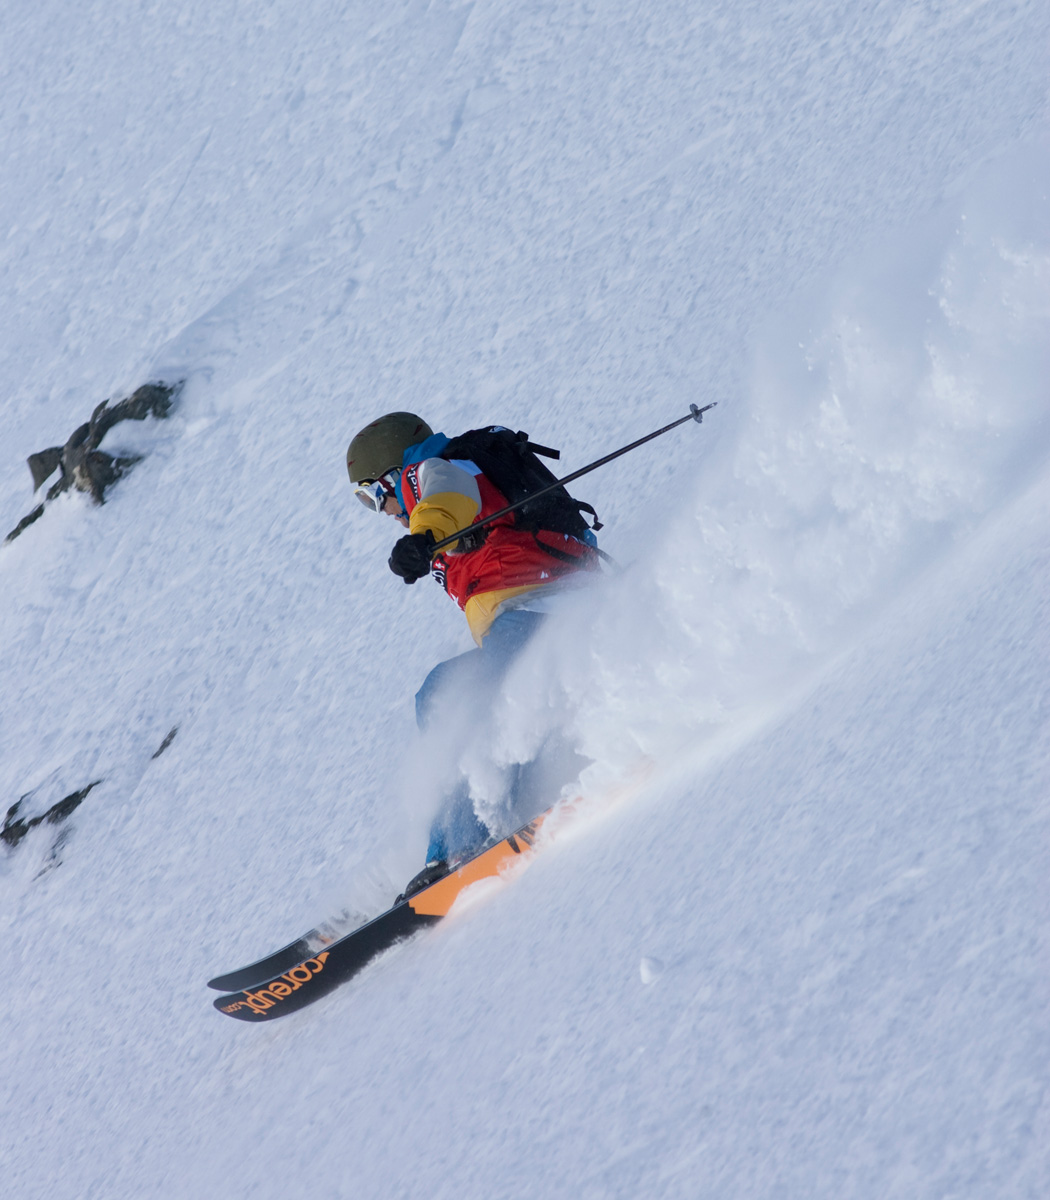 RIDER: CANDIDE THOVEX - FRA
©NISSAN XTREME BY SWATCH - VERBIER 2010 
Photographer:  J. HADIK